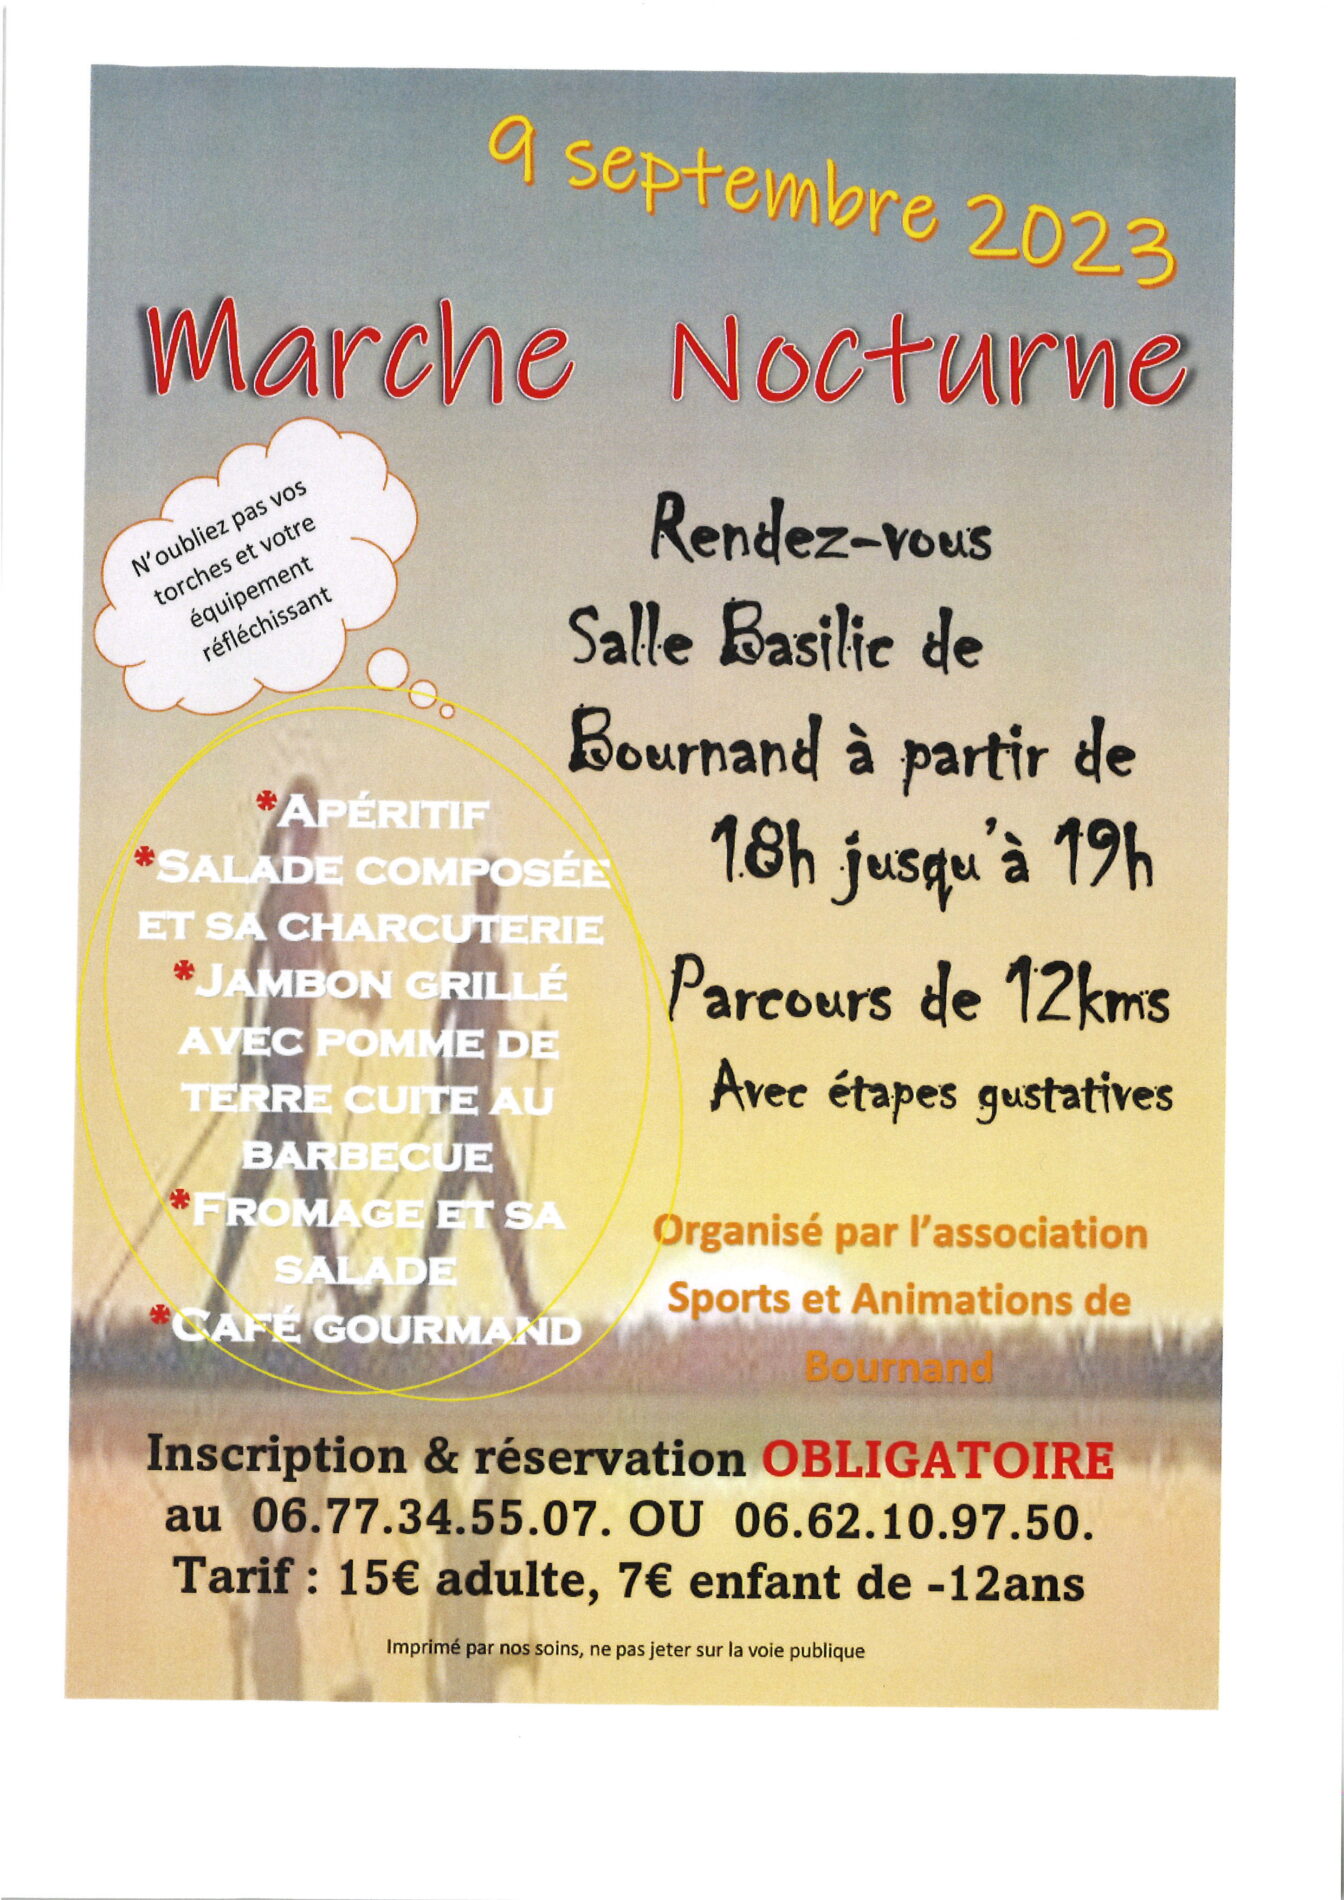 You are currently viewing Marche Nocturne